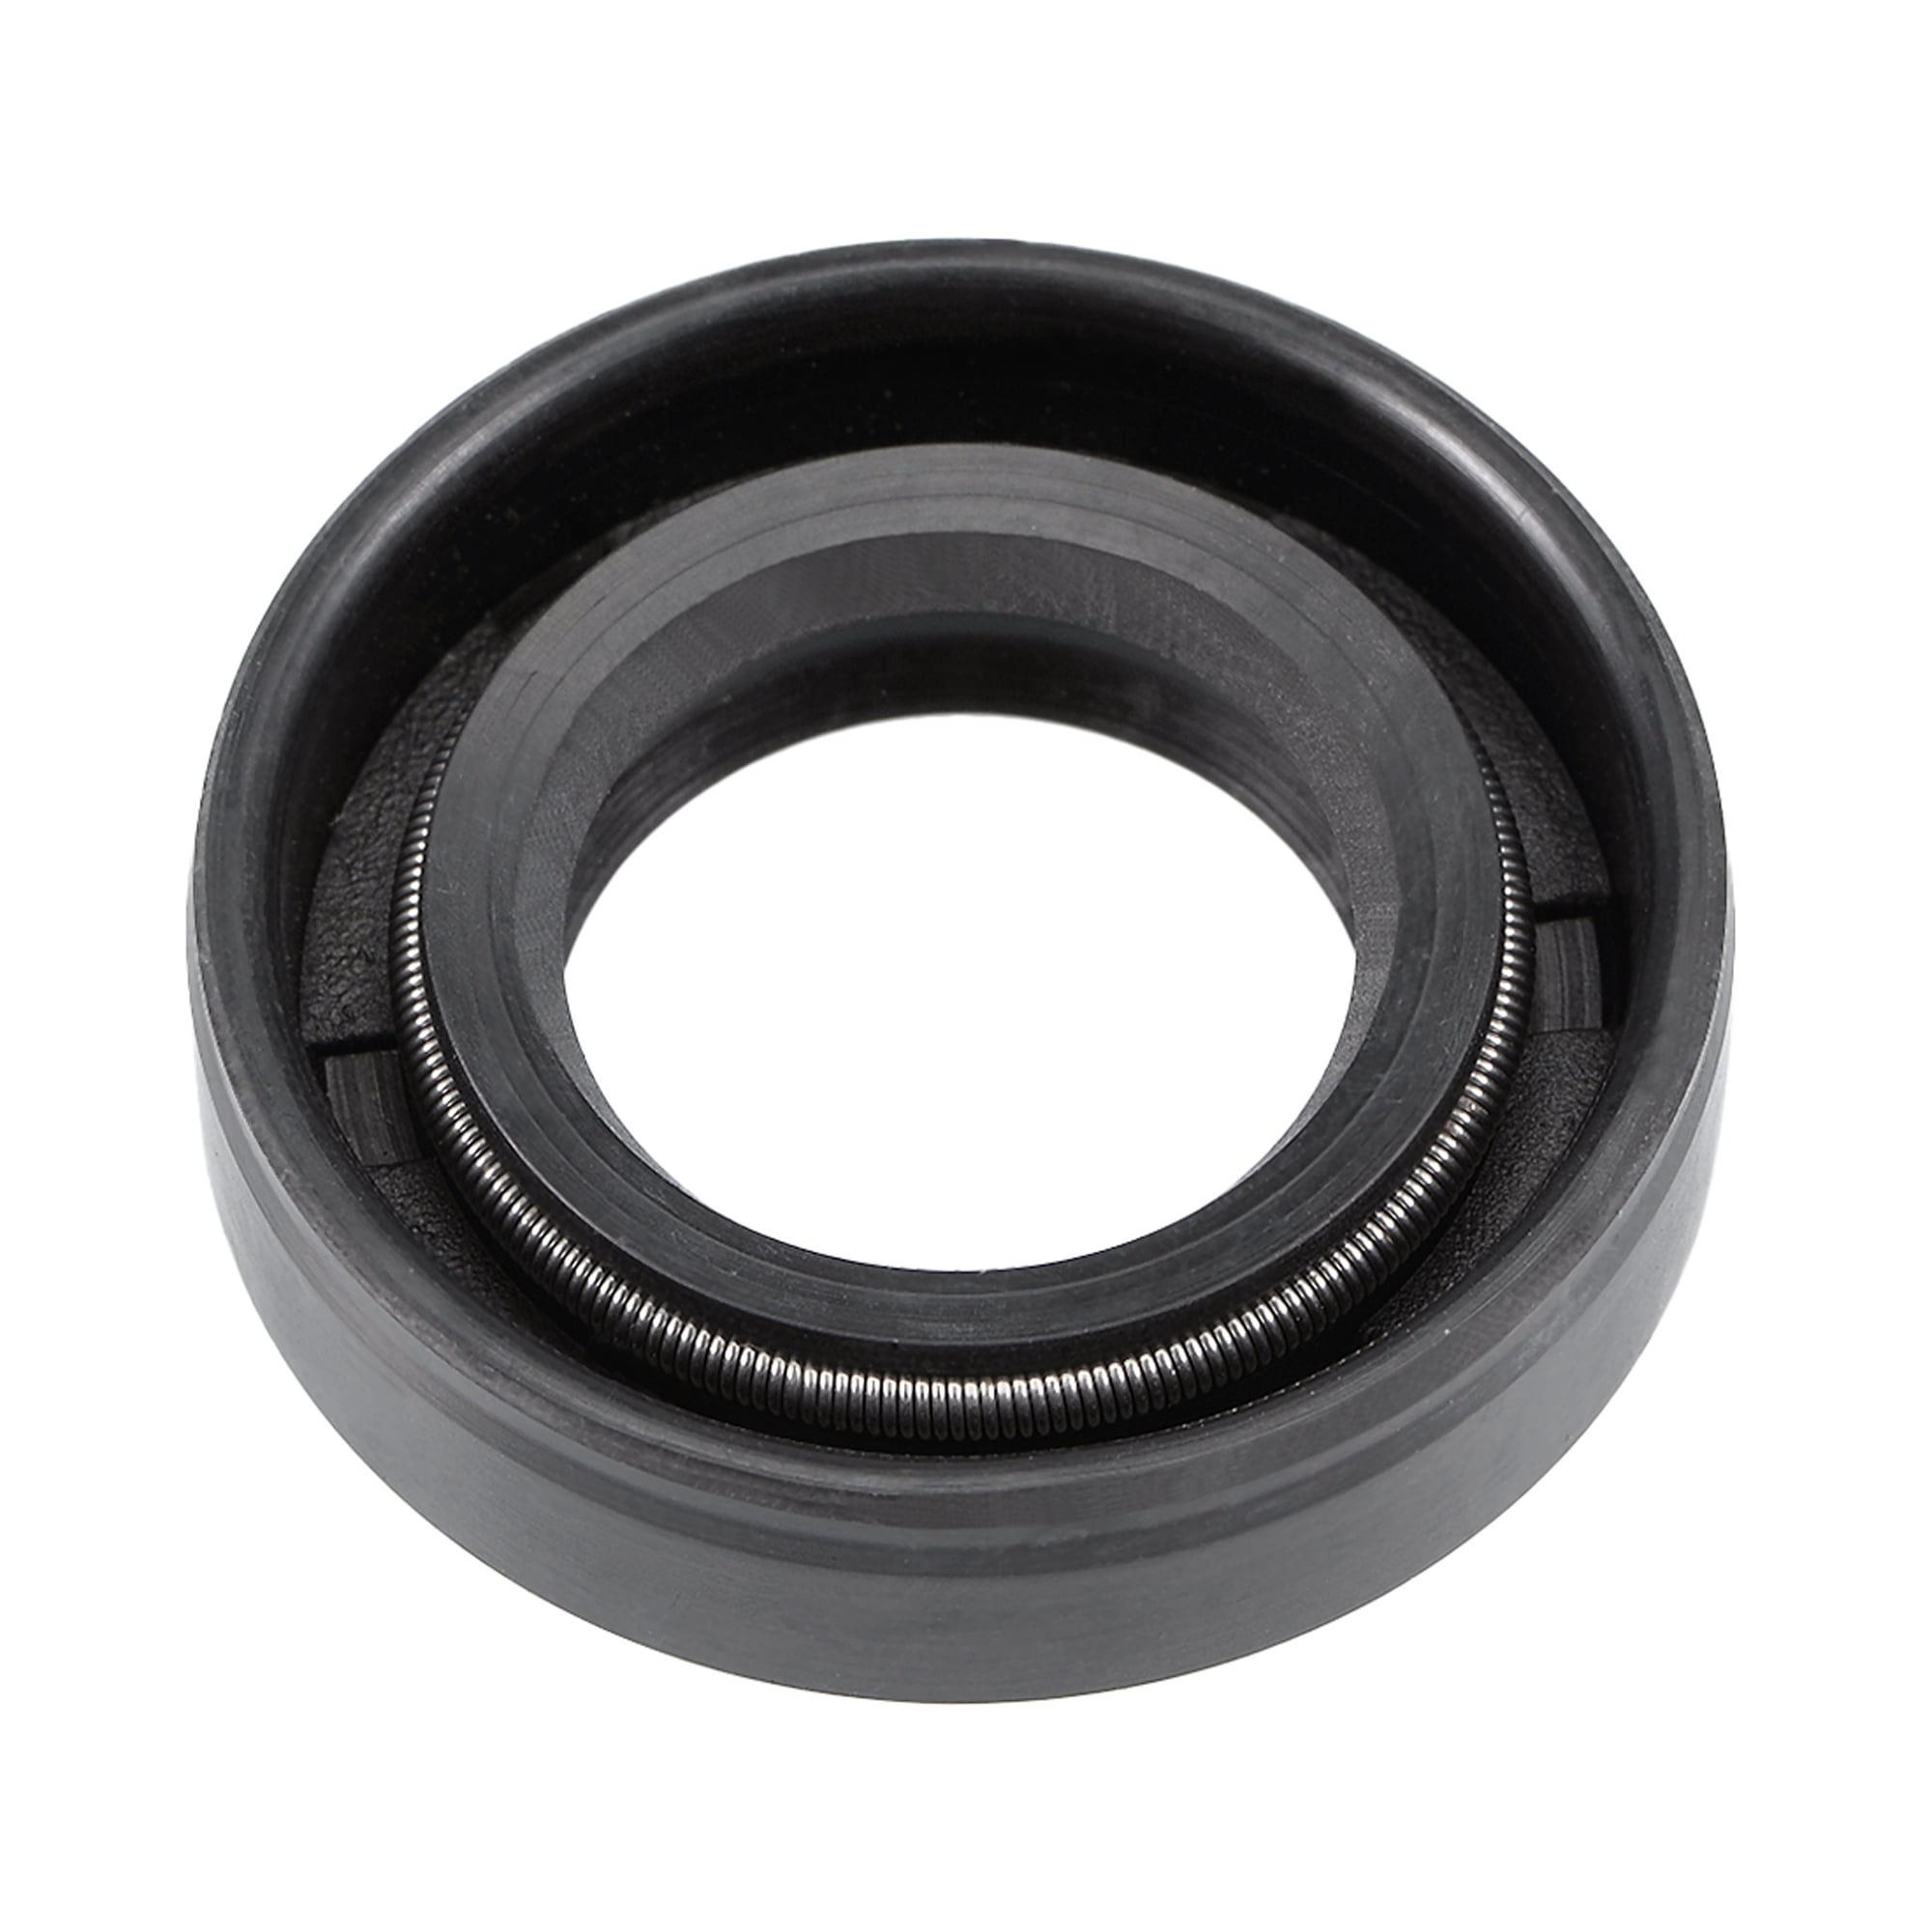 Oil Seal Size 15mm X 27mm X 7mm 